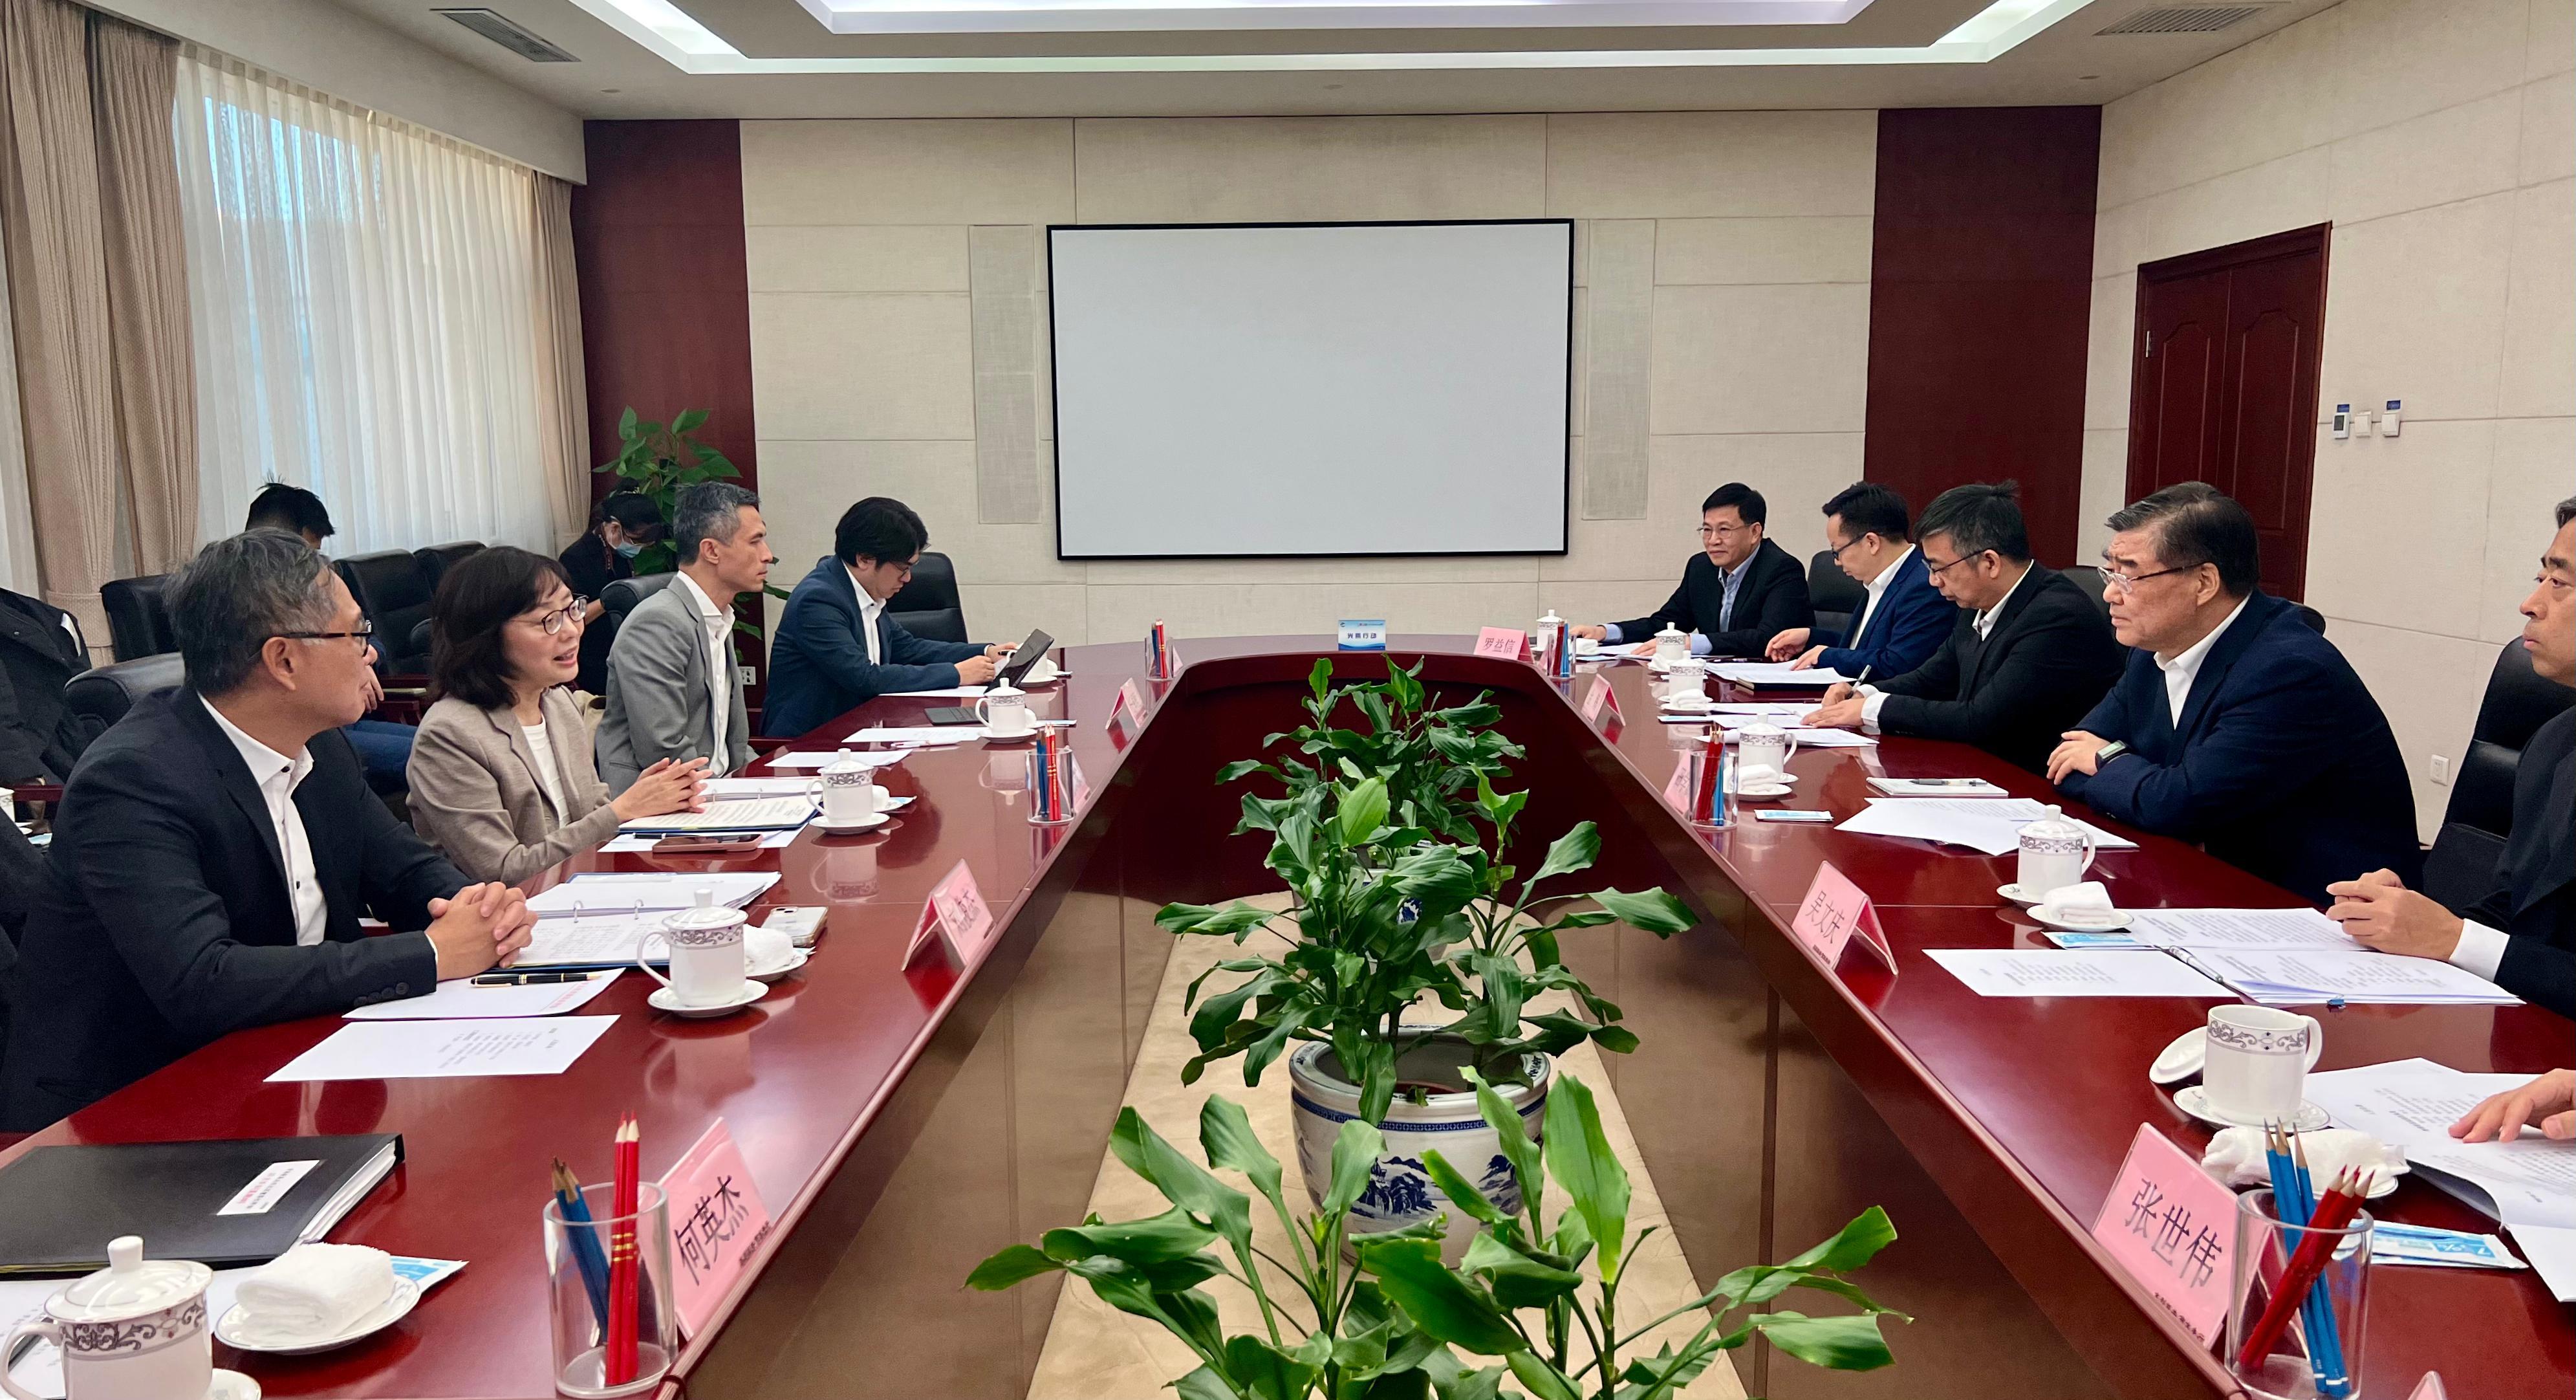 The Secretary for Development, Ms Bernadette Linn (right), met with the Vice Minister of Culture and Tourism and Administrator of the National Cultural Heritage Administration, Mr Li Qun (left), in Beijing today (November 9).
